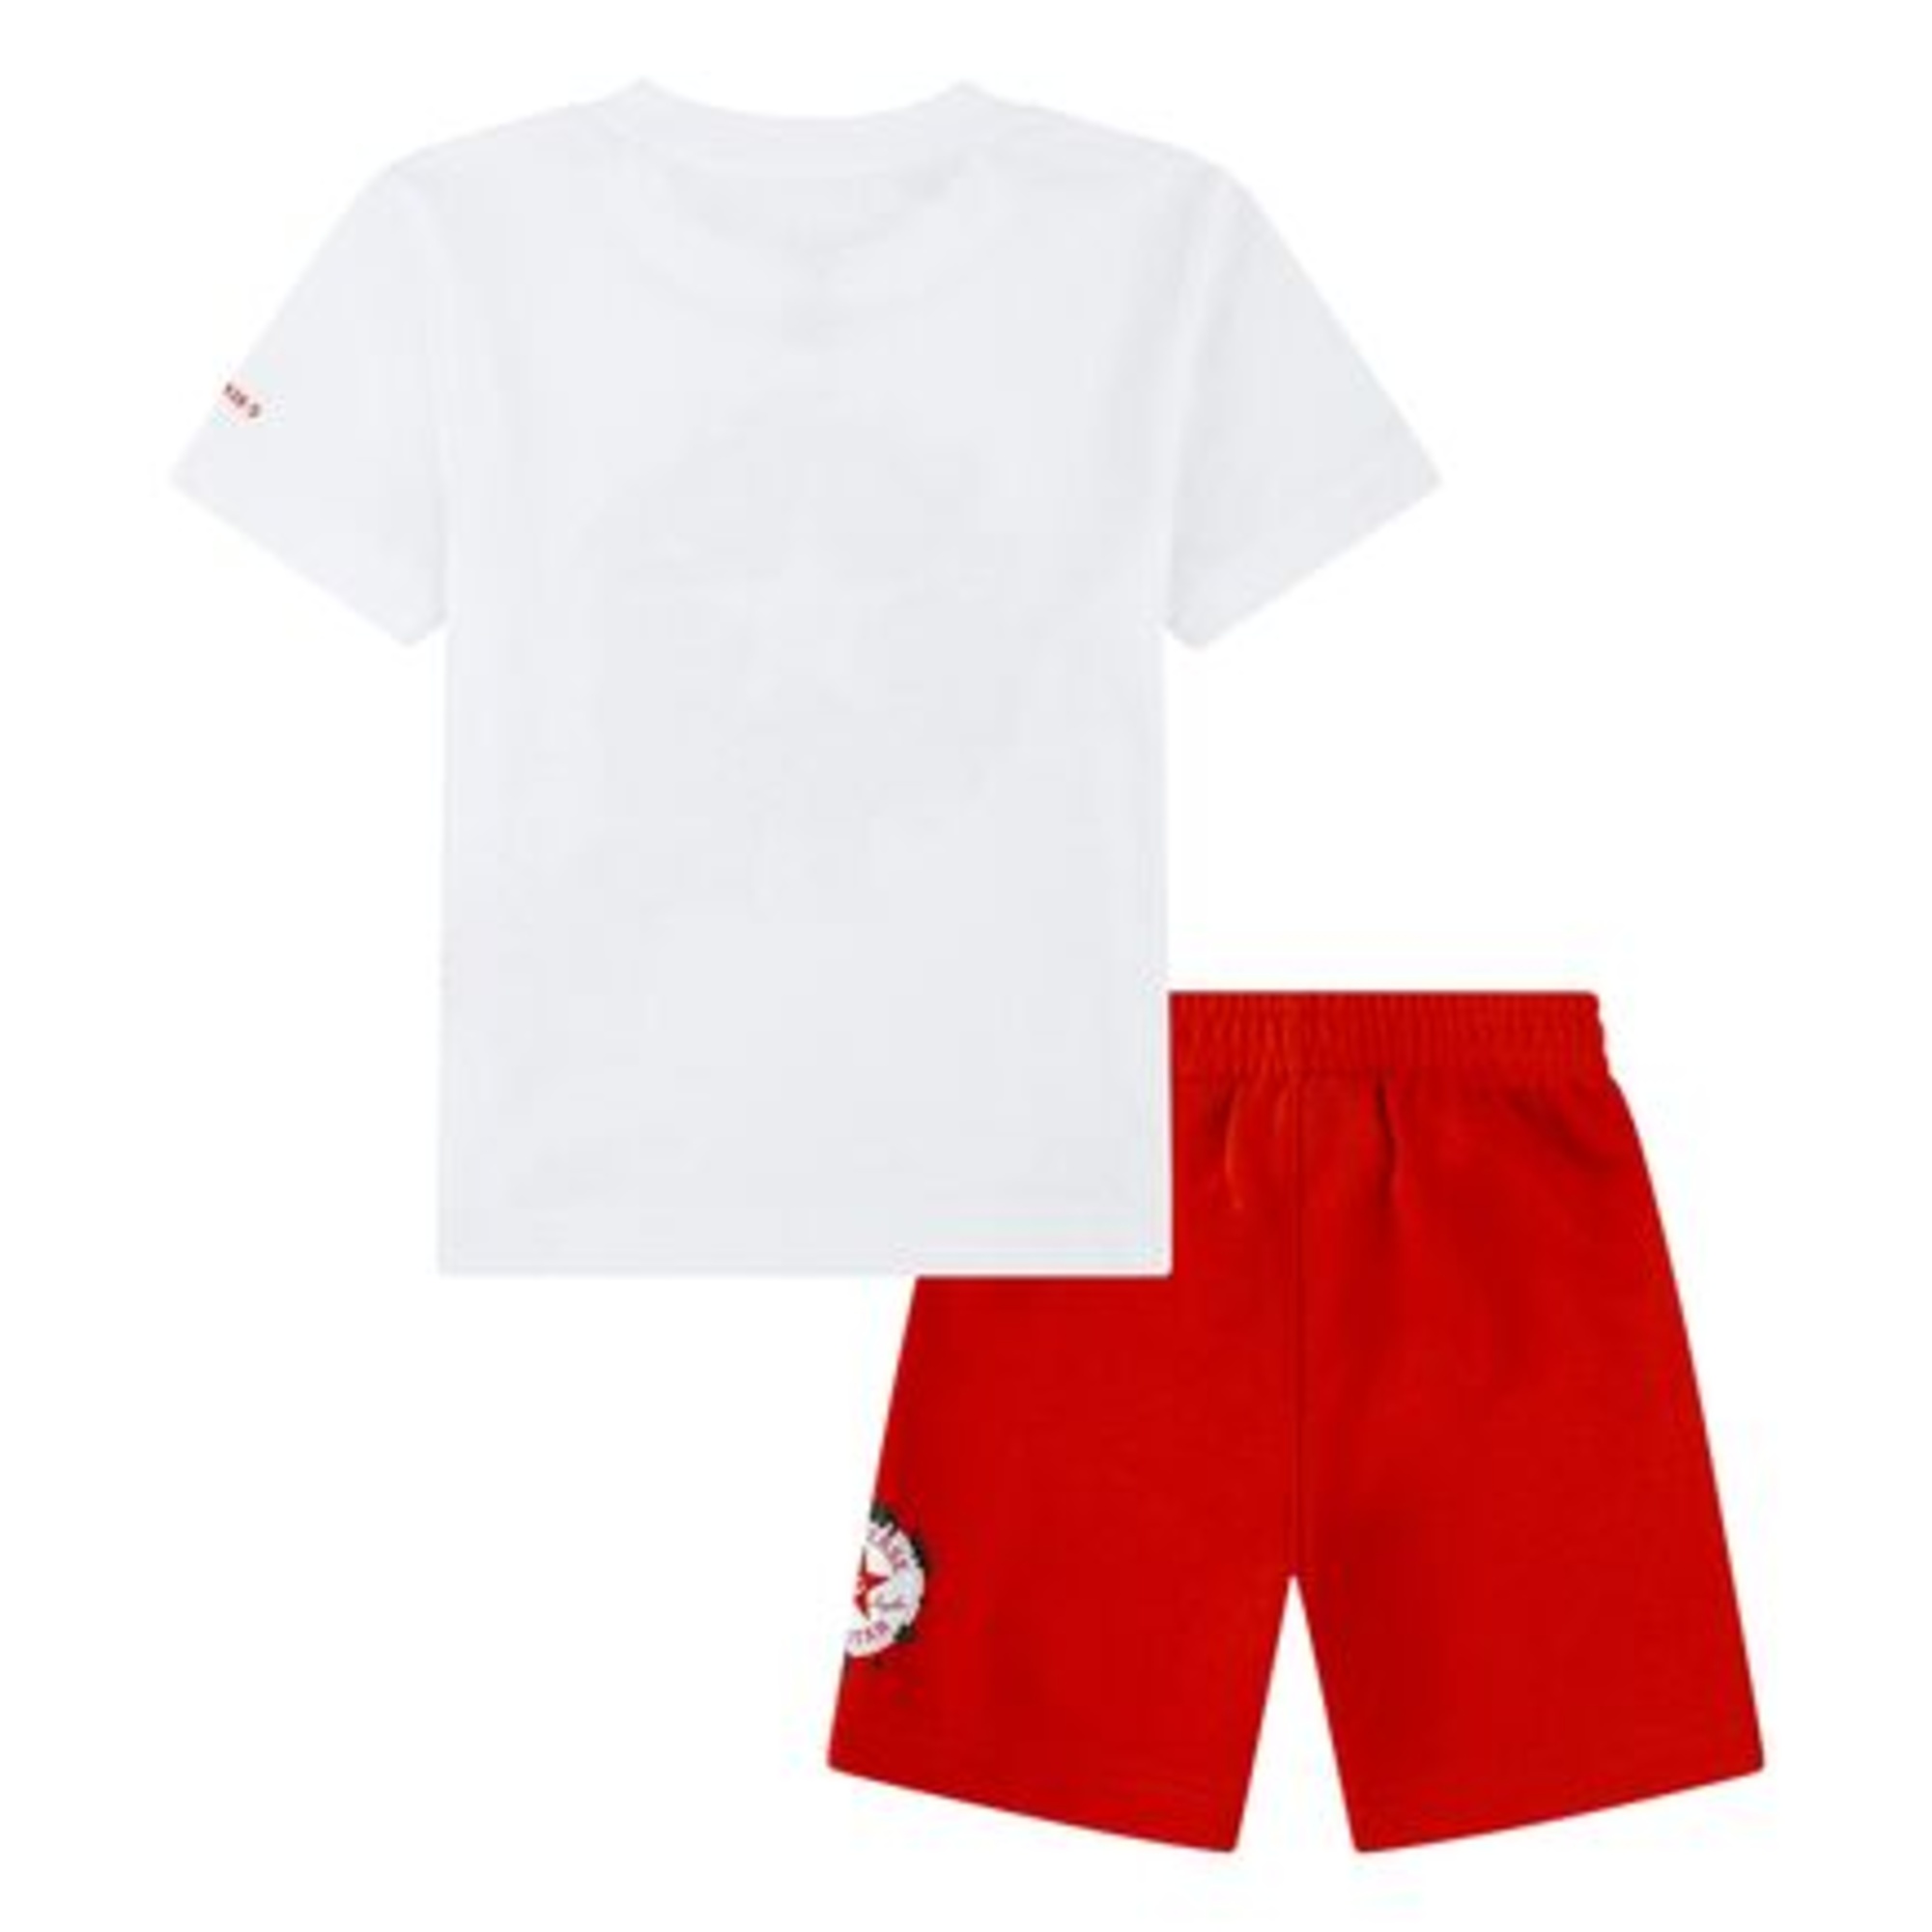 Cnvb squiggle s/s tee+ft short - Nike